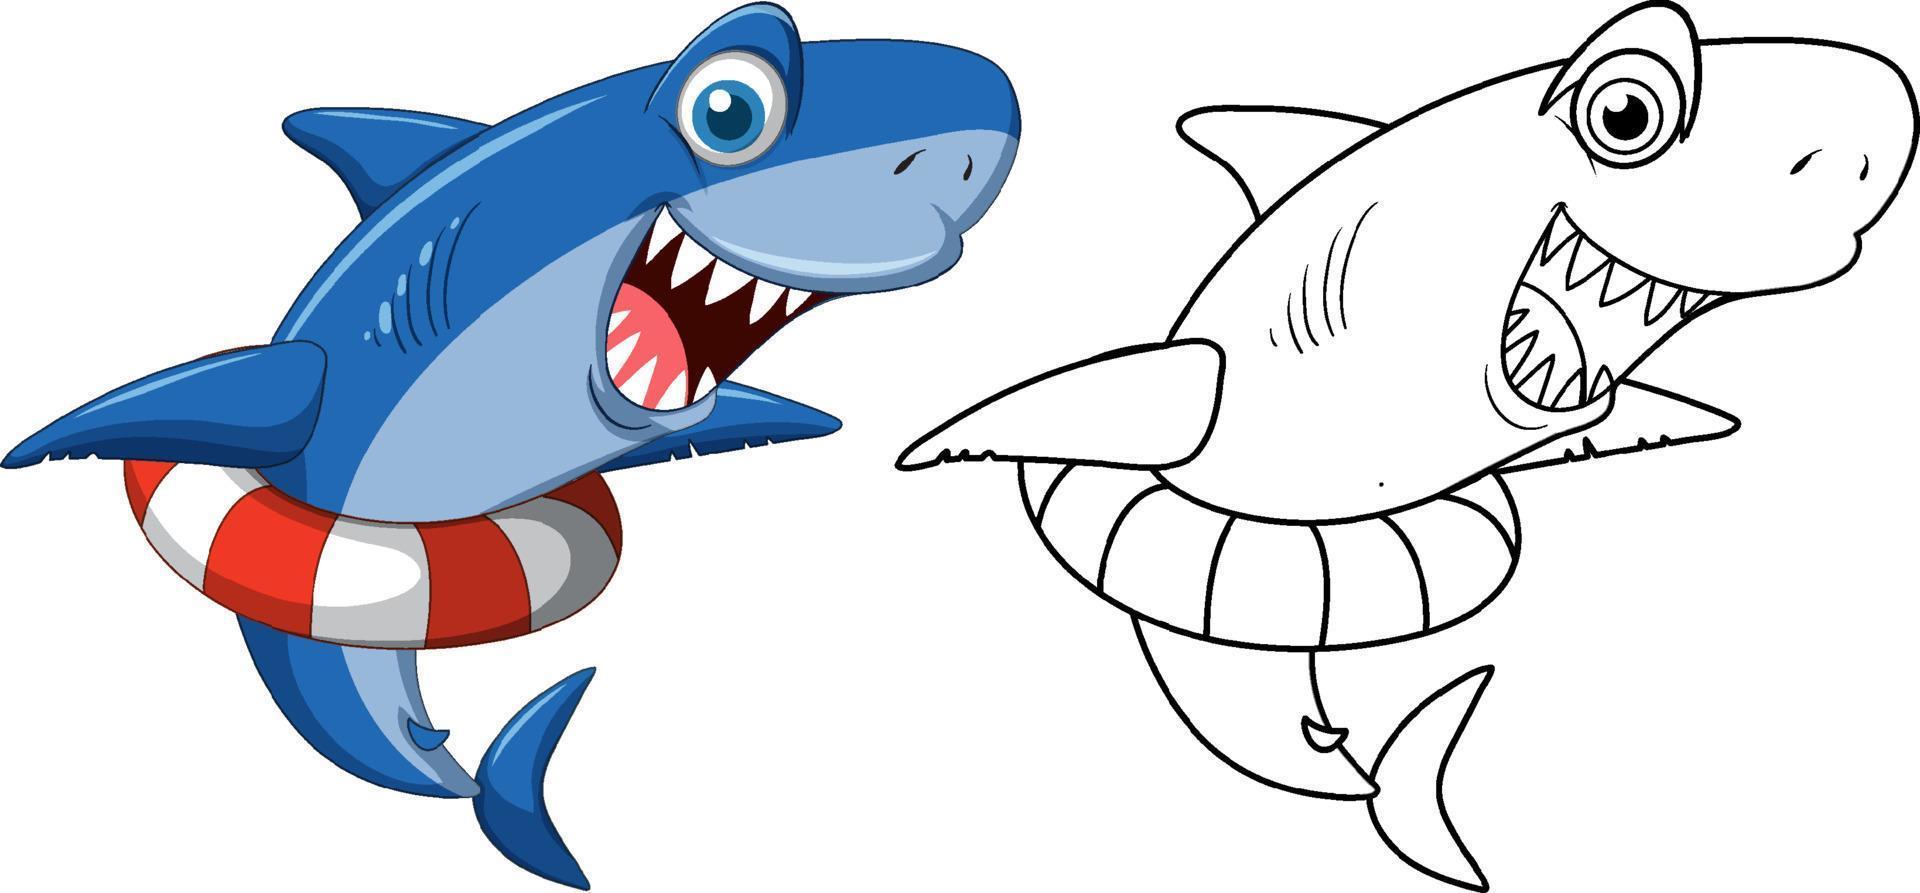 Doodle animal character for shark vector